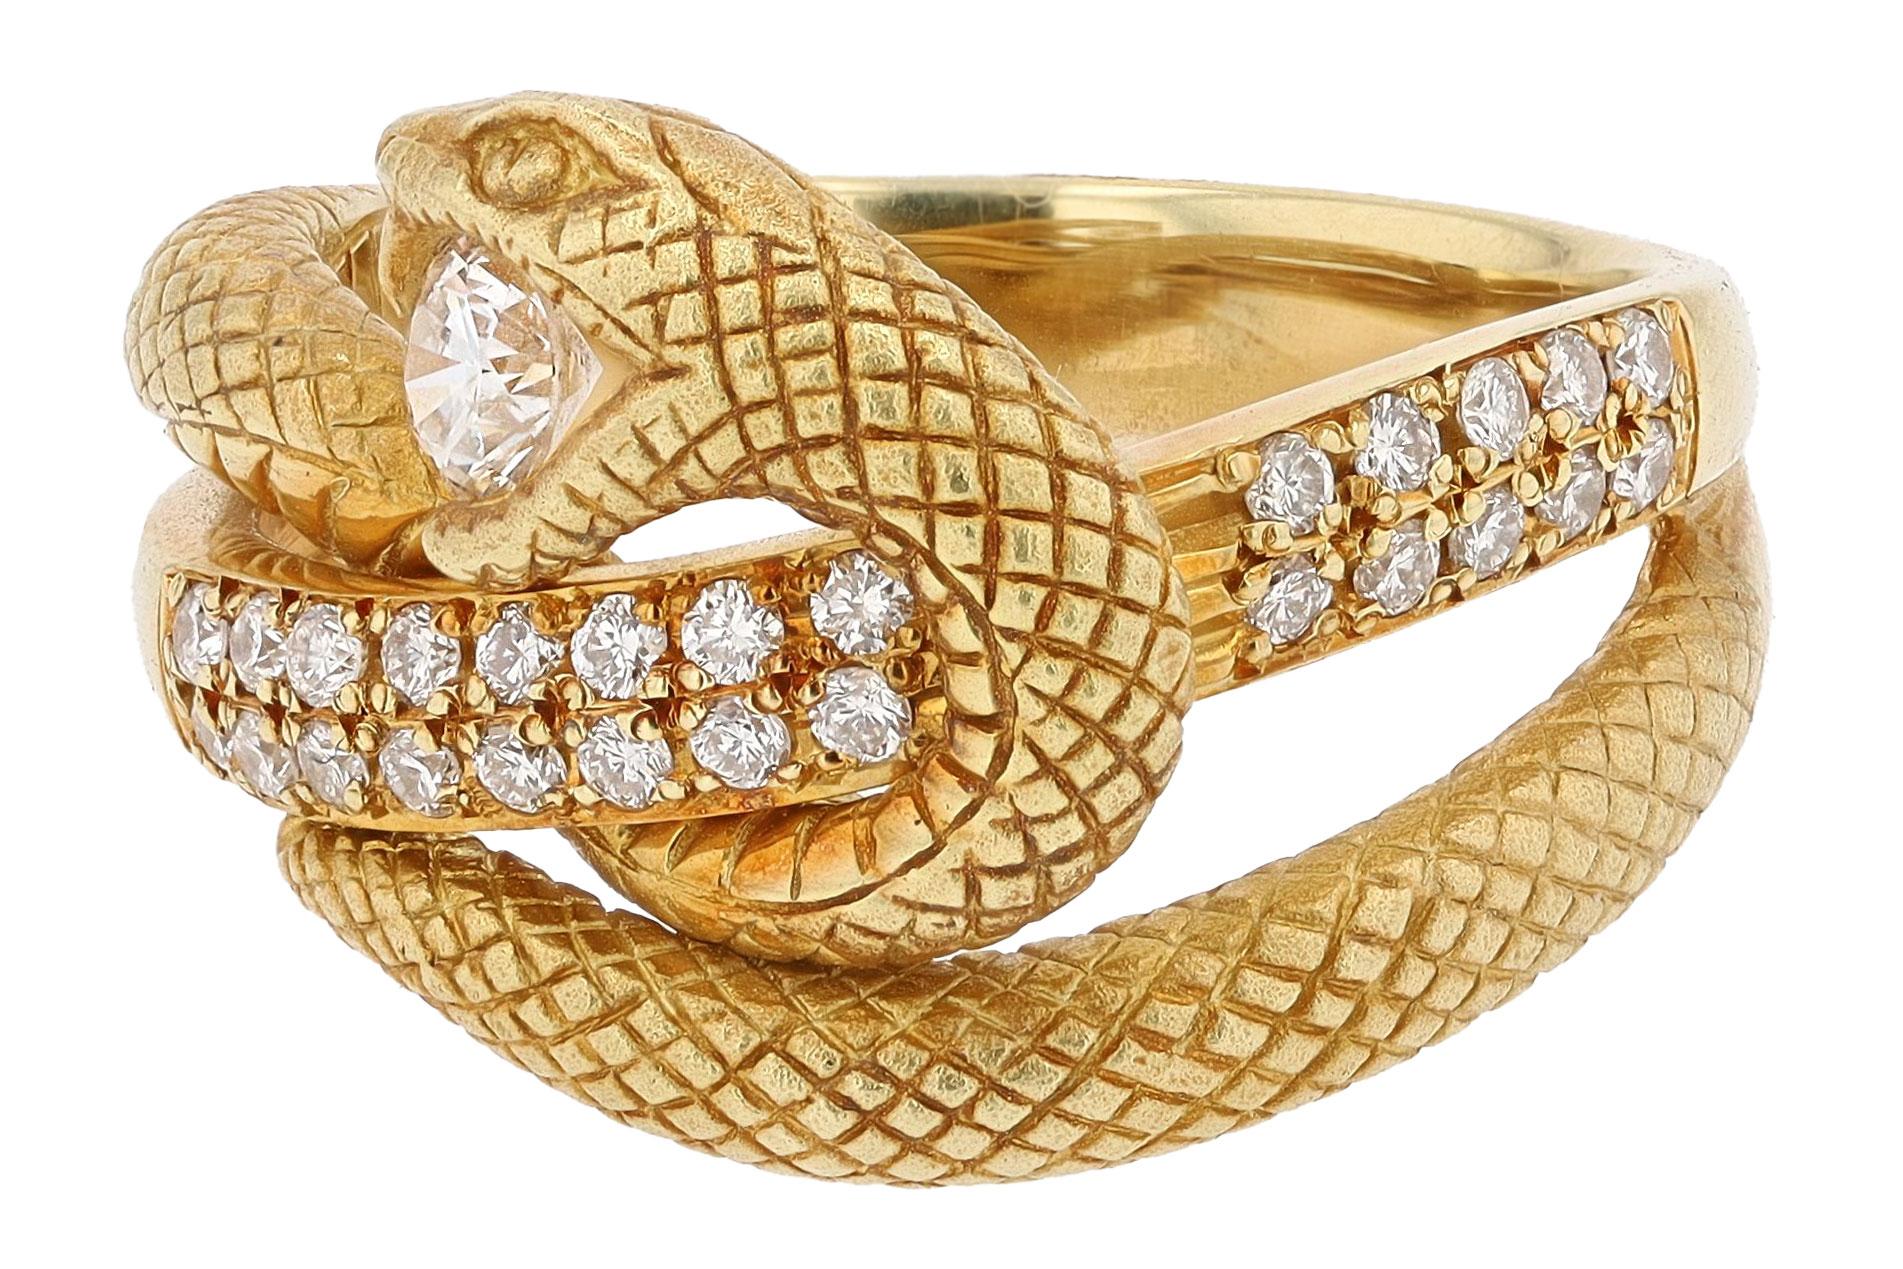 This highly engraved serpent wraps seductively around your finger while fiercely guarding the diamond in her mouth. Revered since ancient times, snake rings have been coveted as a talisman representing rebirth, wisdom and longevity. A staff